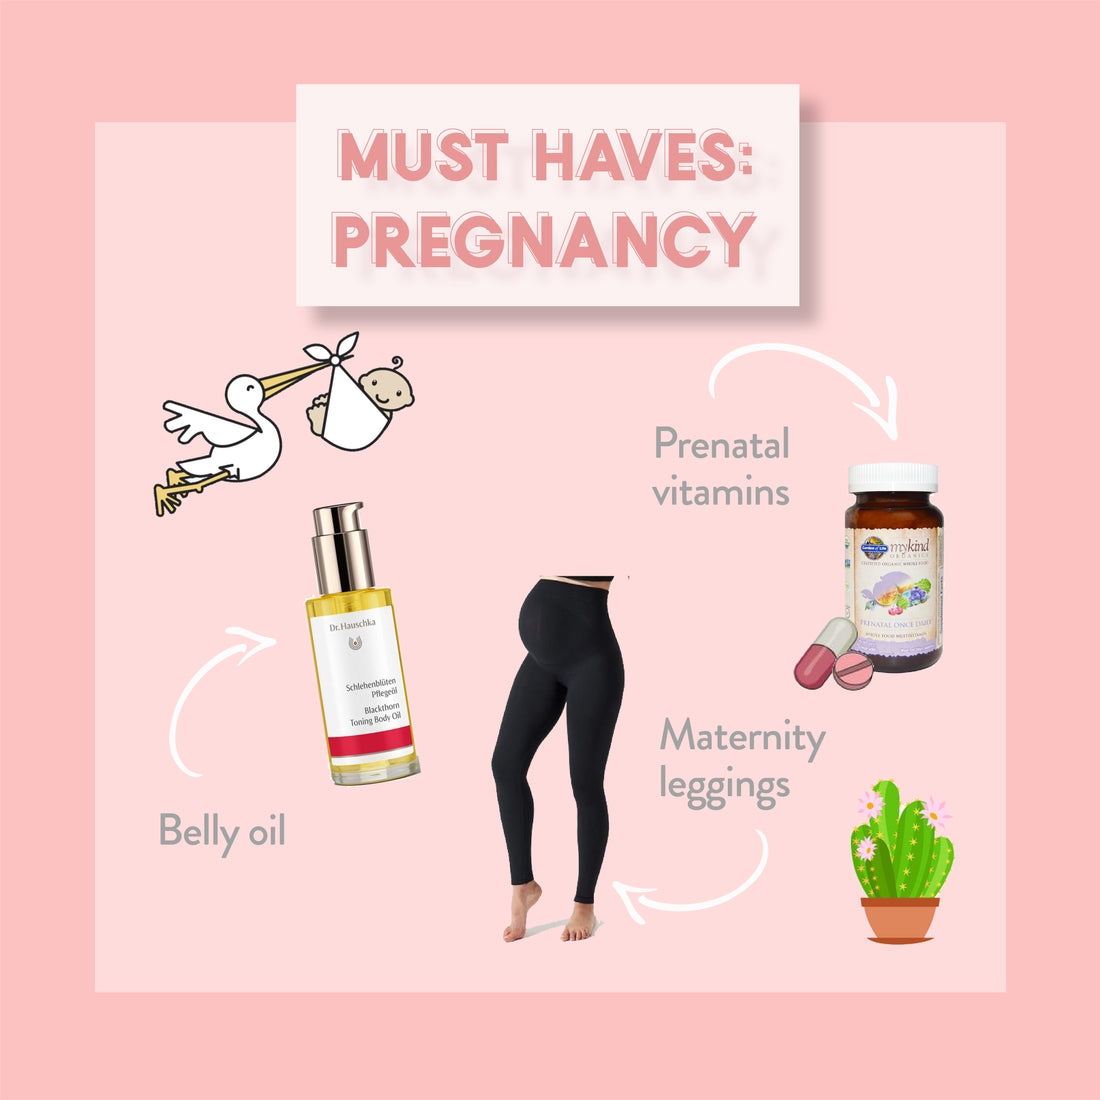 MUST HAVES: PREGNANCY